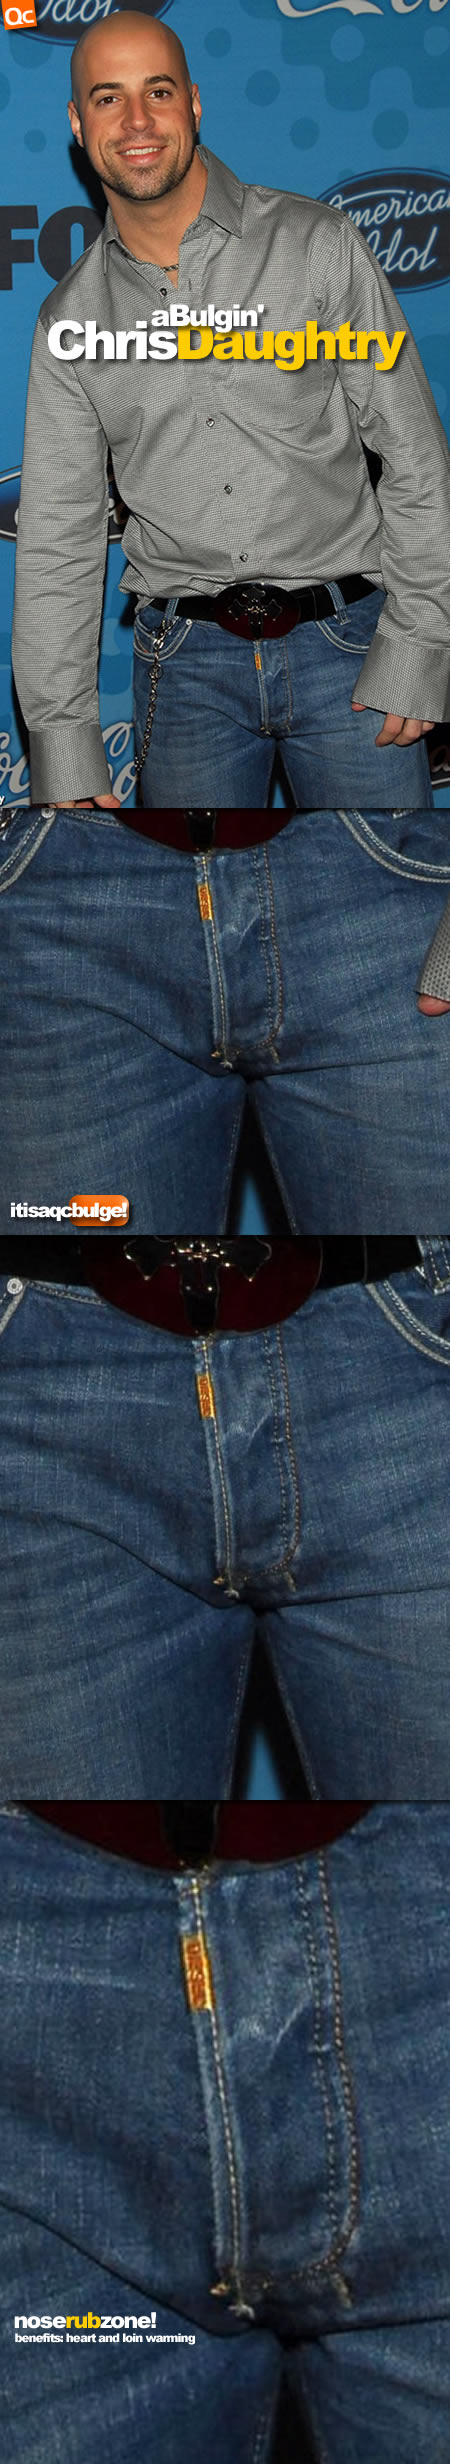 More Chris Daughtry's Scratch & Sniff Bulge